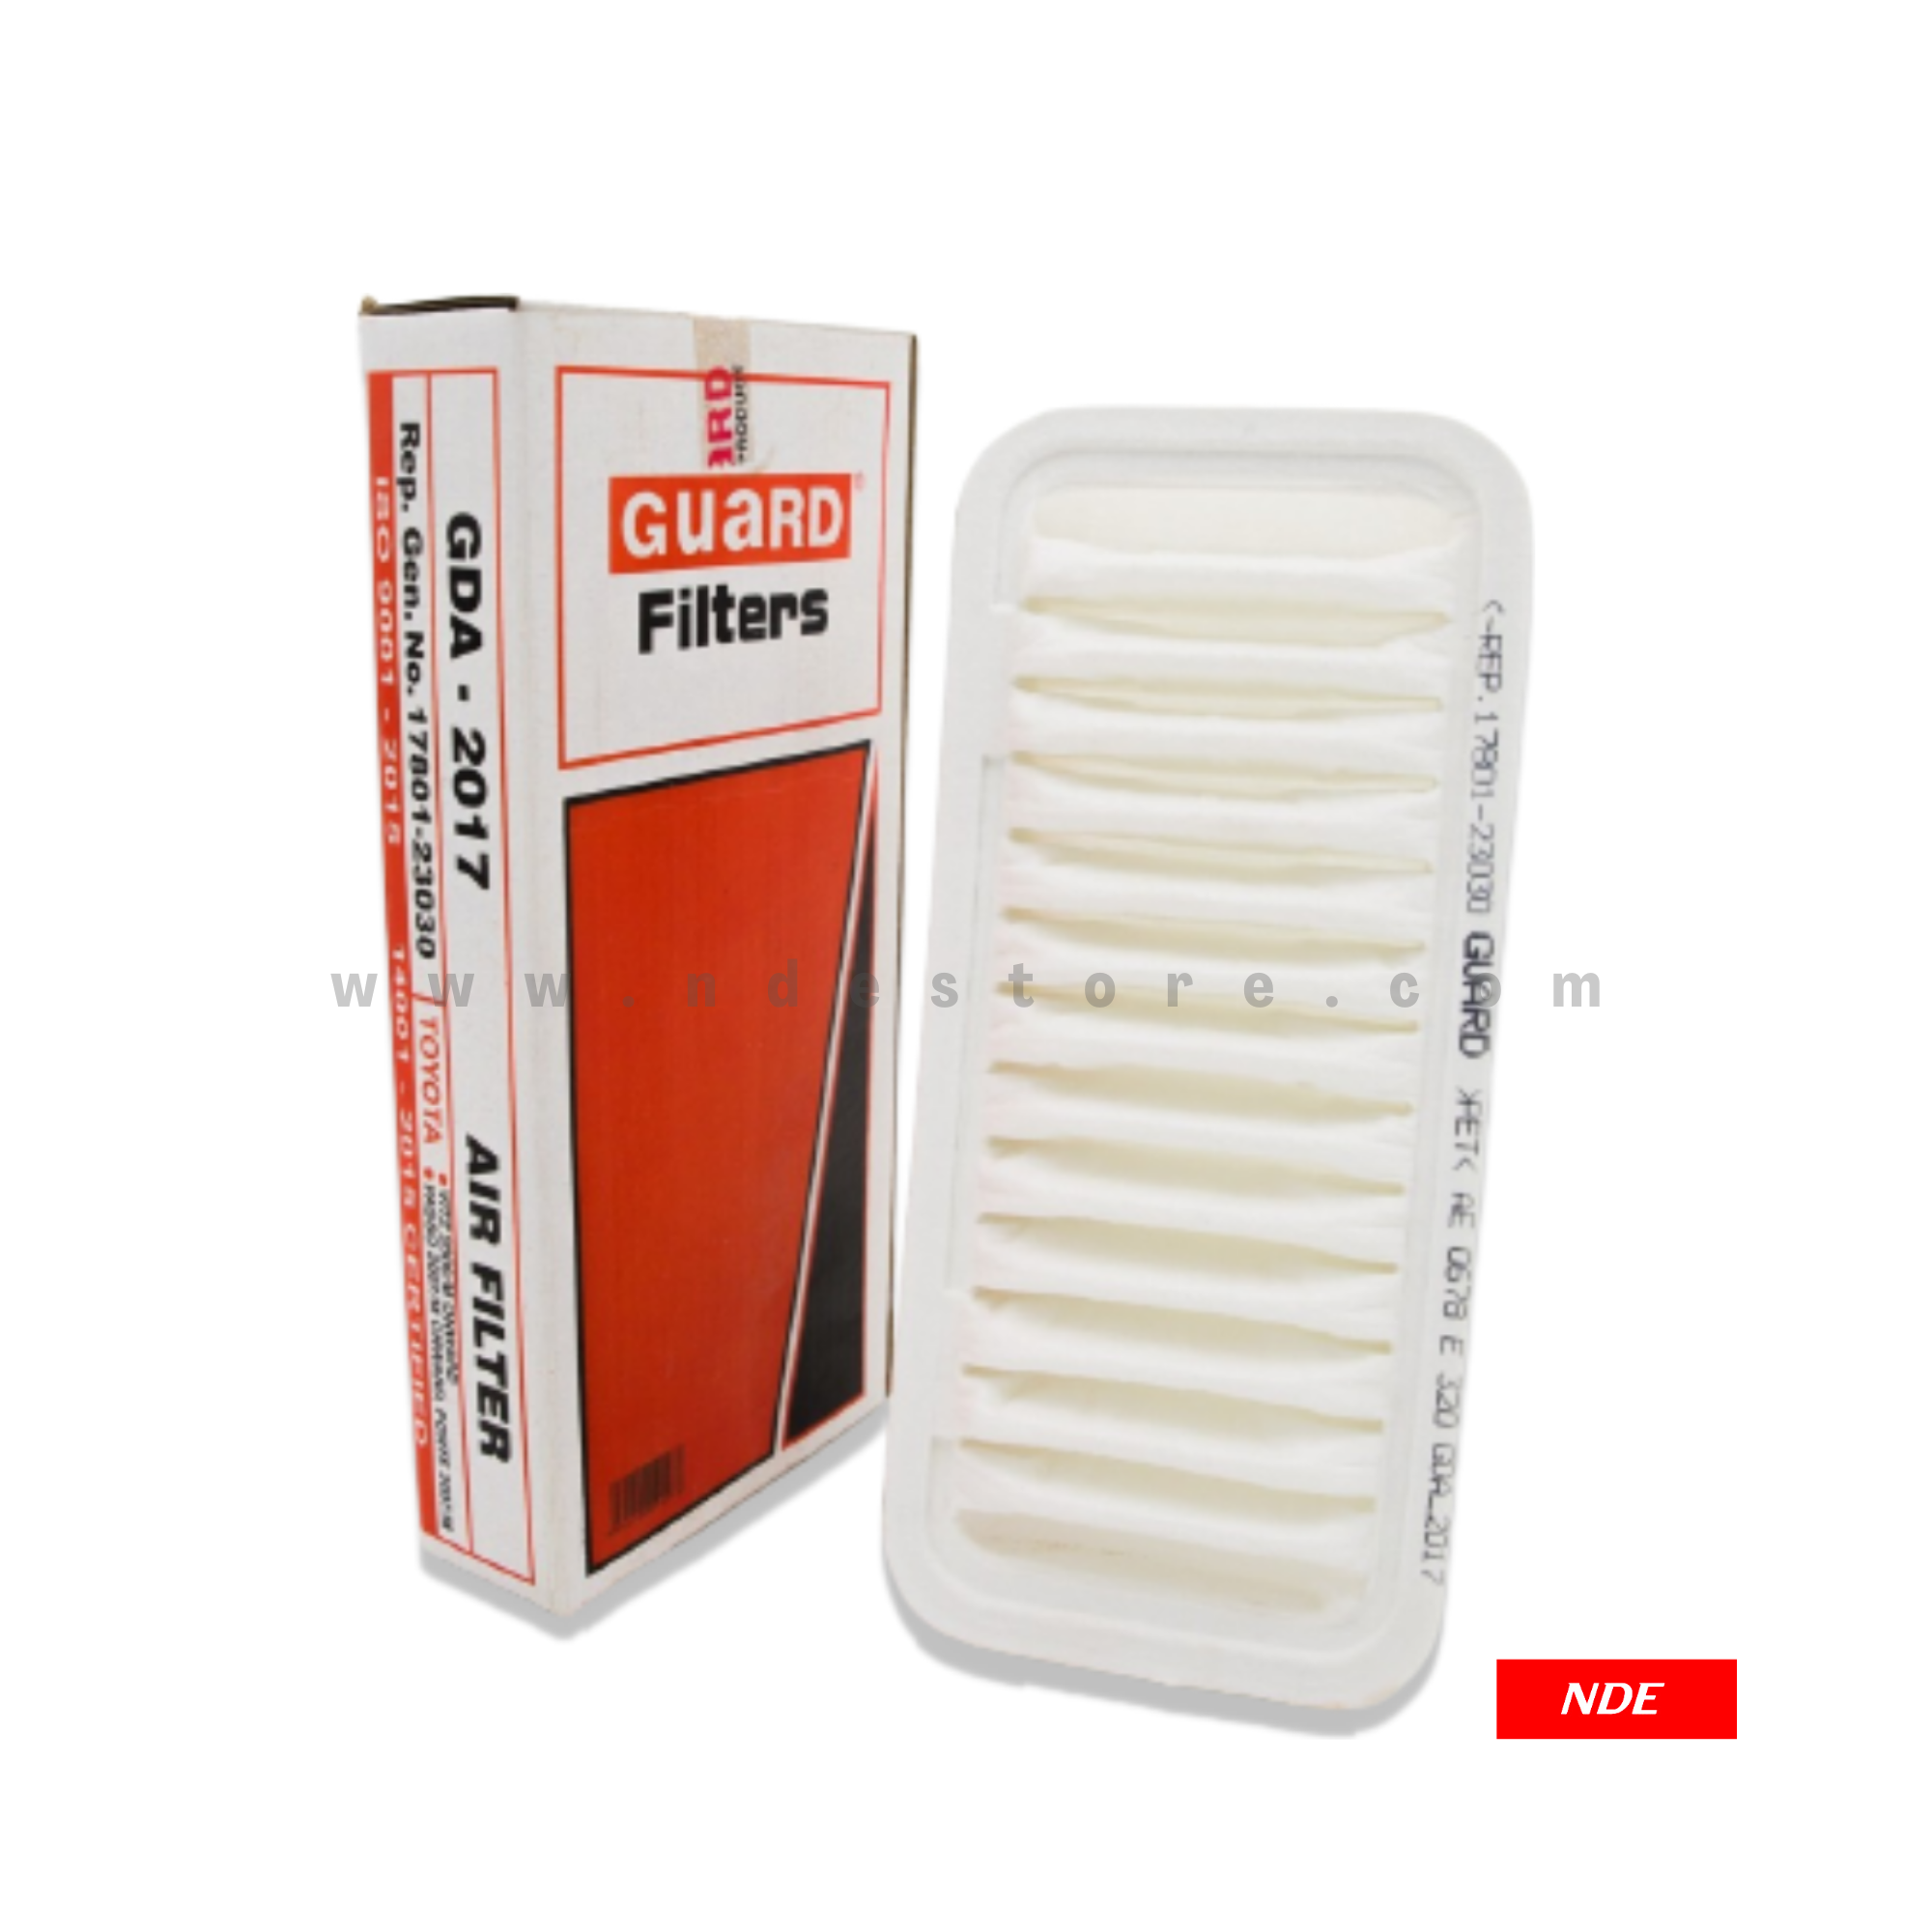 AIR FILTER GUARD FILTER FOR TOYOTA VITZ (2002-ONWARDS)